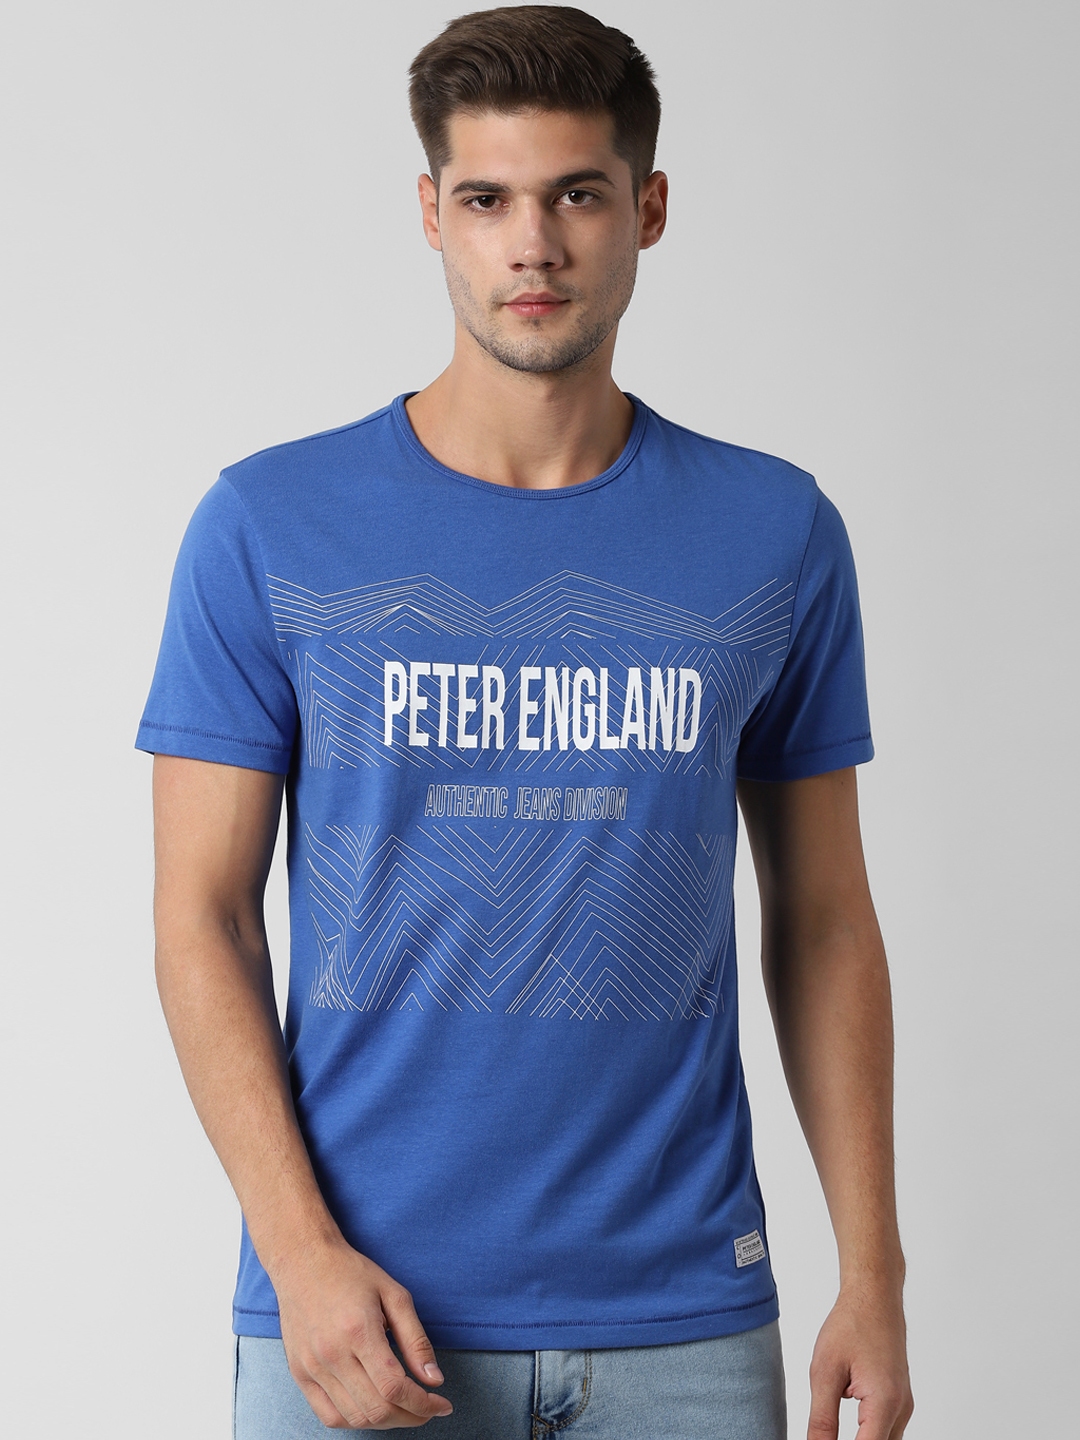 Buy Peter England Casuals Men Blue & White Slim Fit Printed Round Neck ...